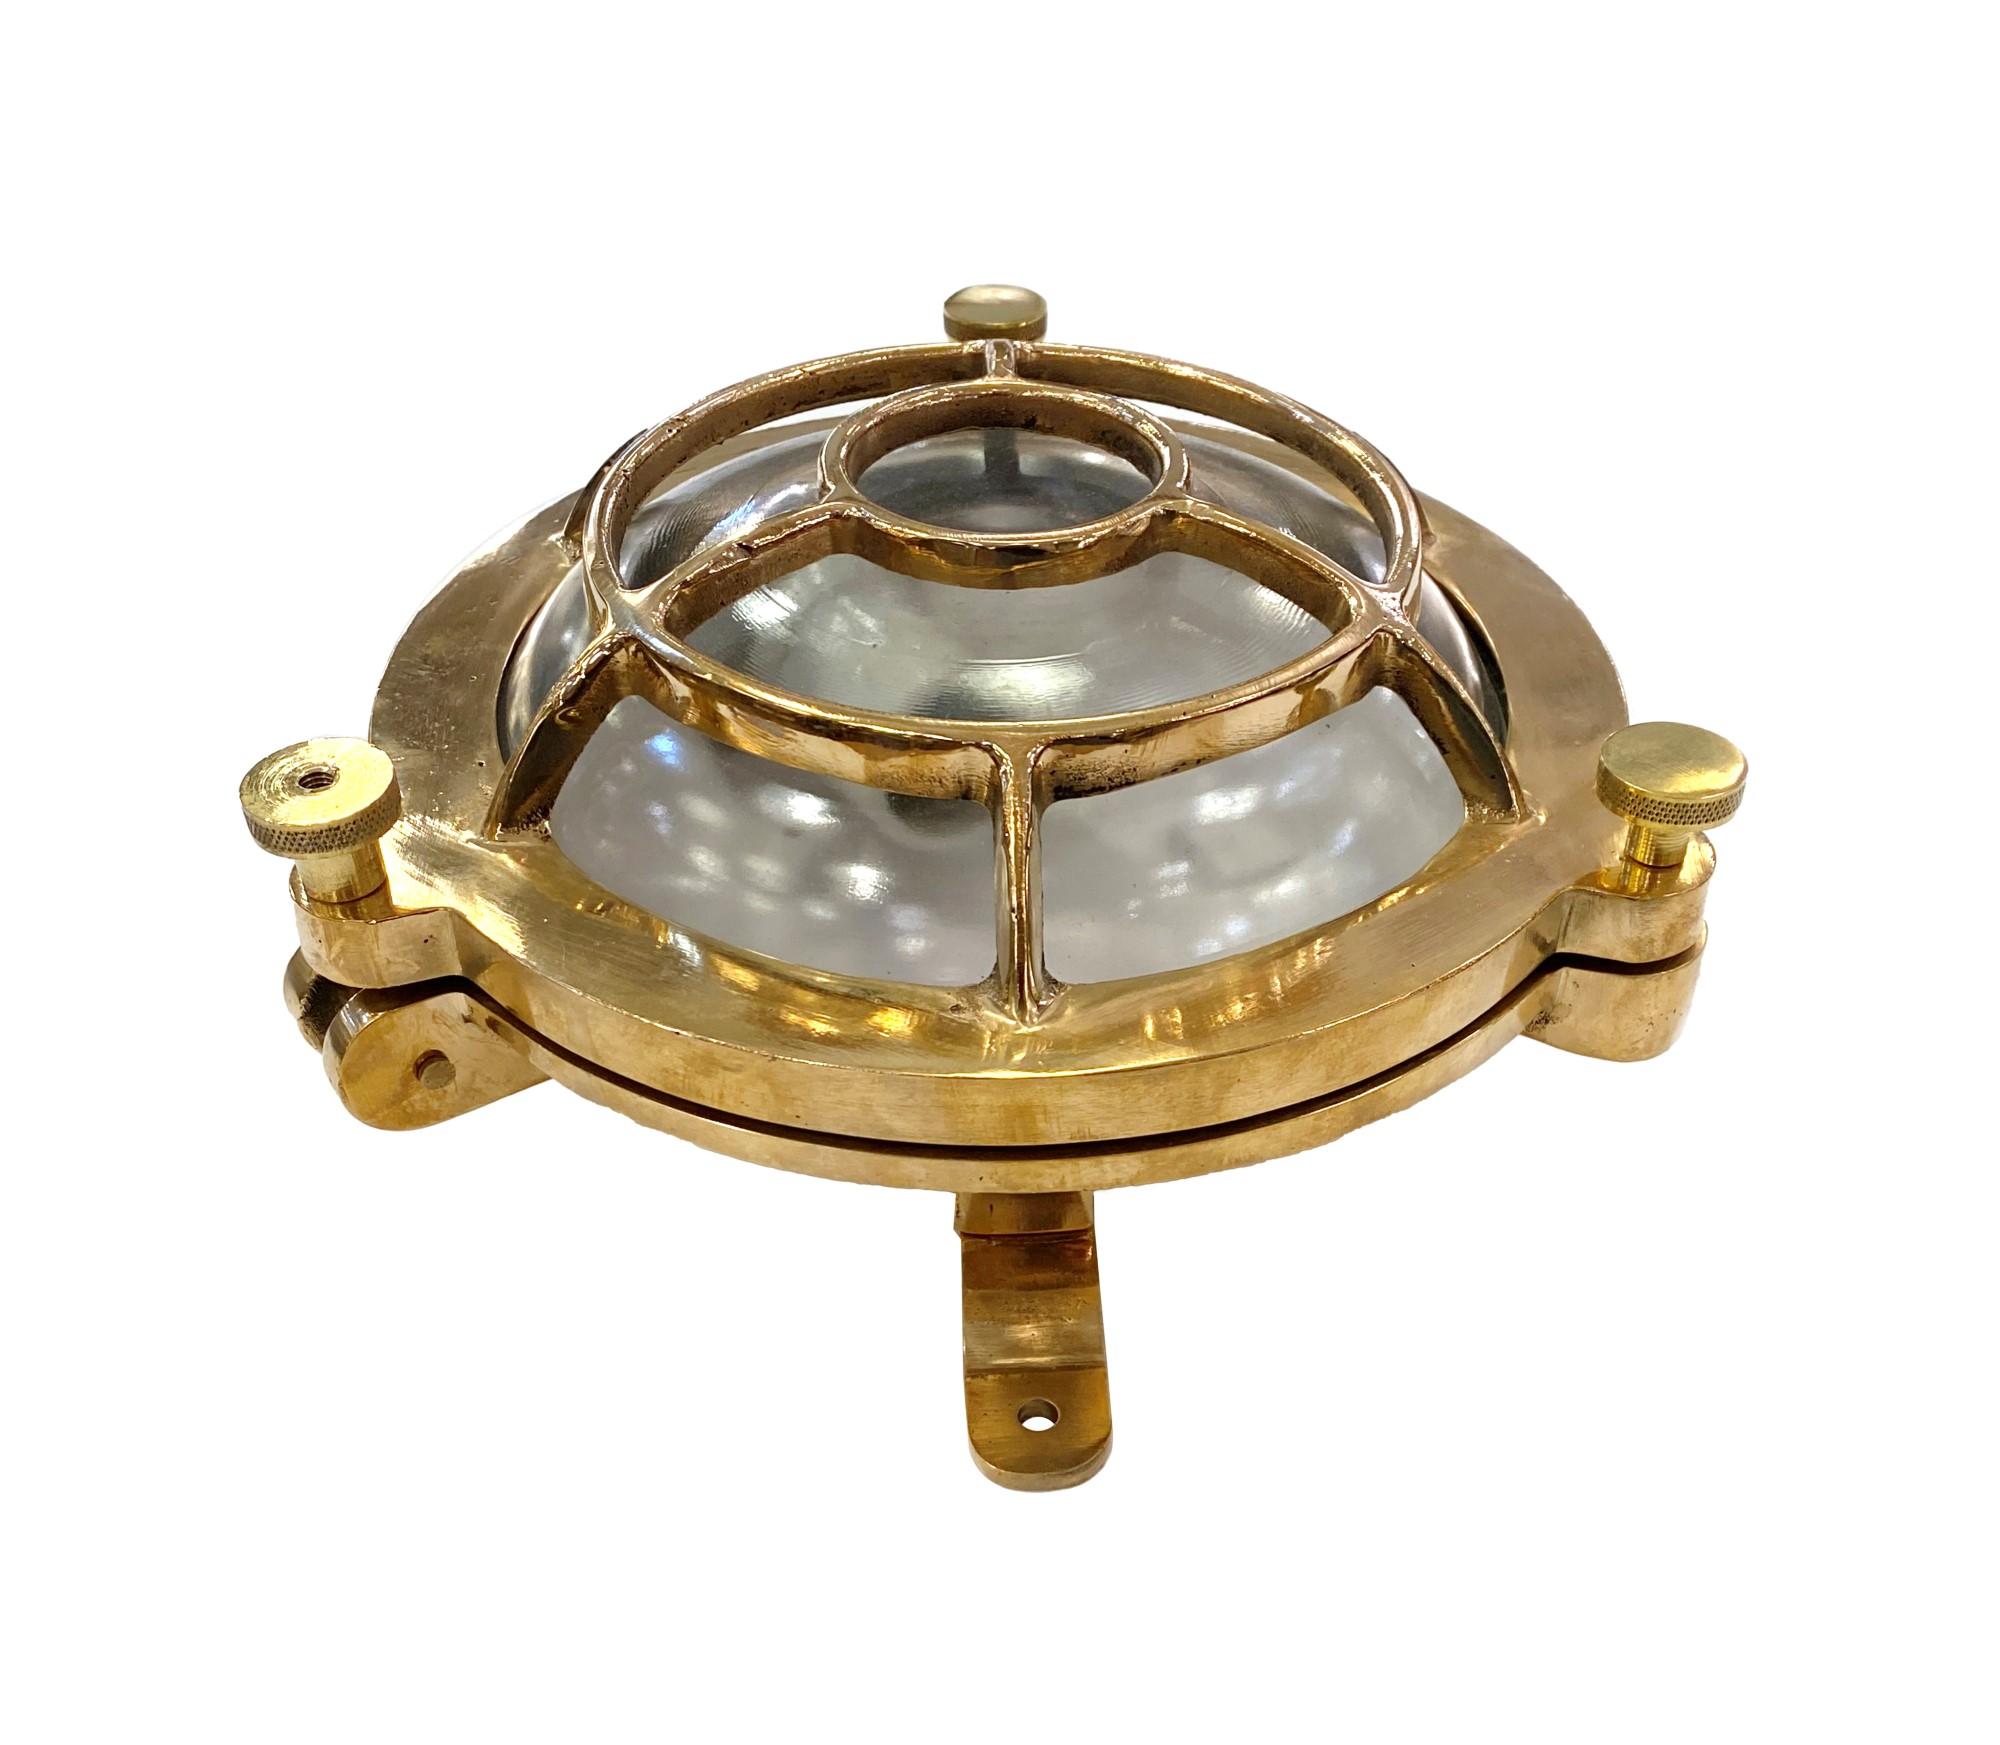 2010s cast brass round nautical bulkhead ship light. Newly wired and take one medium base 60 watt incandescent bulb. Can be used either as a ceiling light or wall sconce. With new industrial rubber gasket. Small quantity available at time of